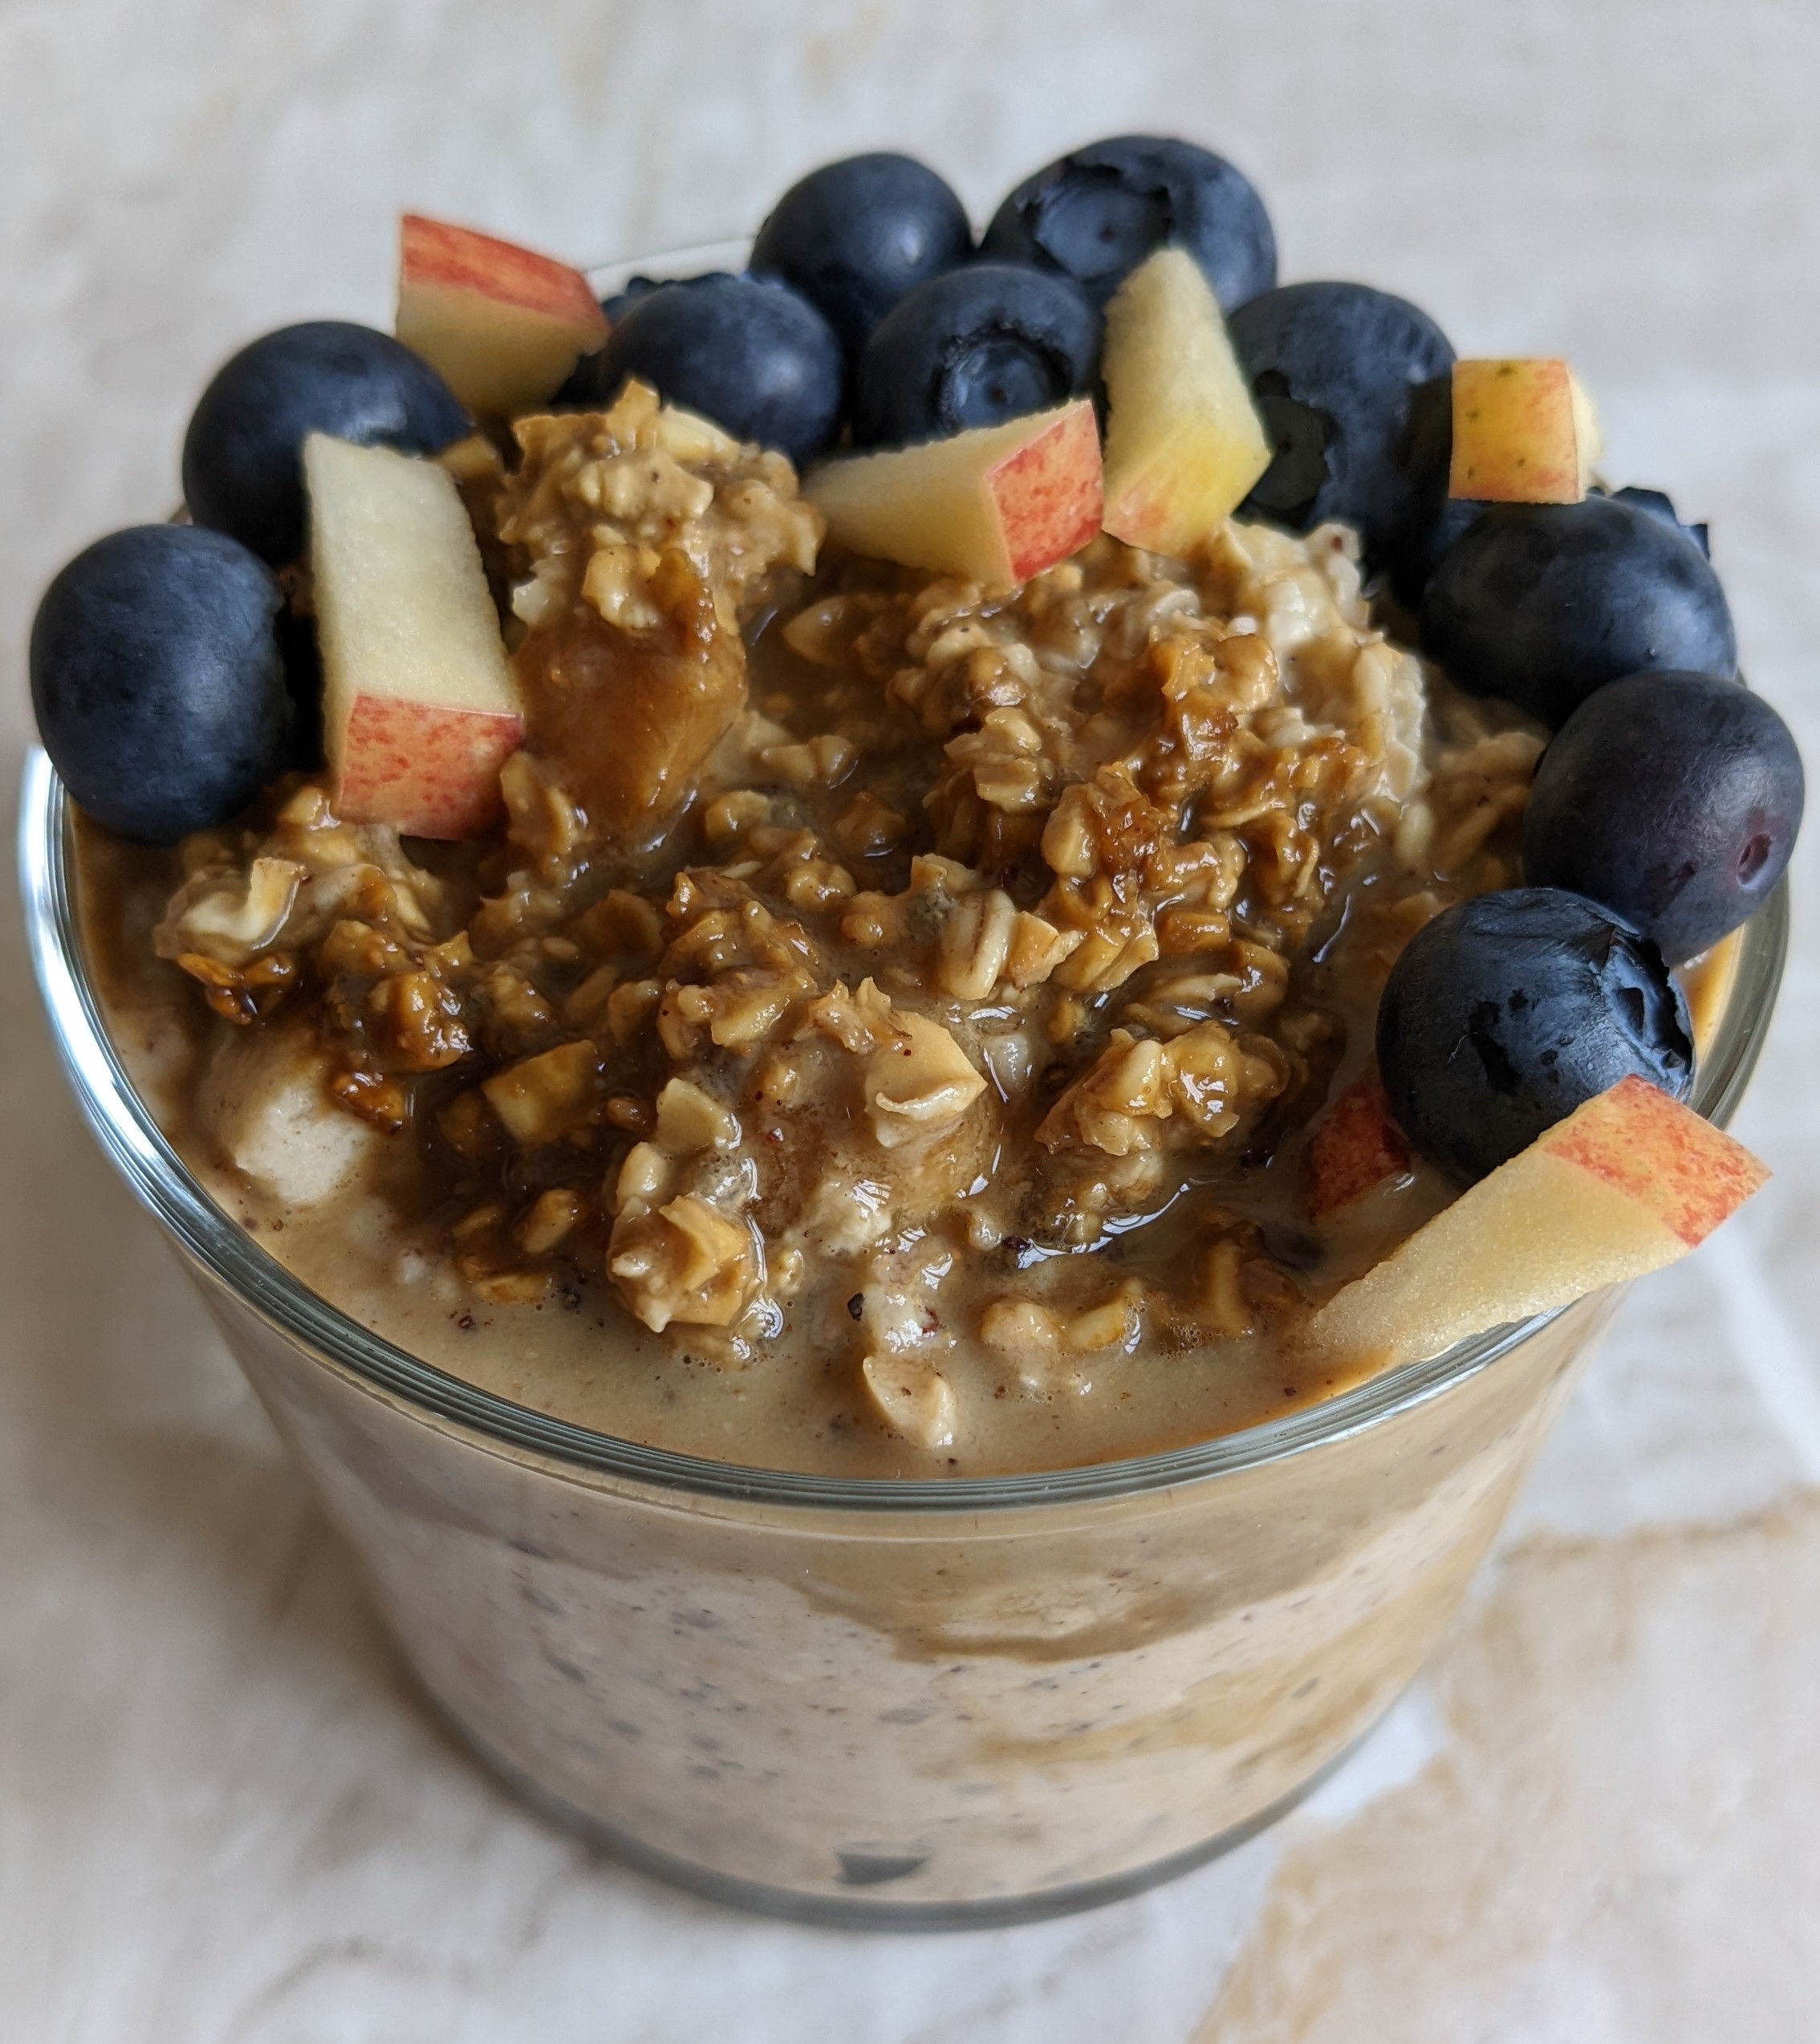 ginger-recipes-apple-and-banana-cinnamon-ginger-powder-chia-seeds-overnight-oats-easy-breakfast-recipes-high-protein-recipes